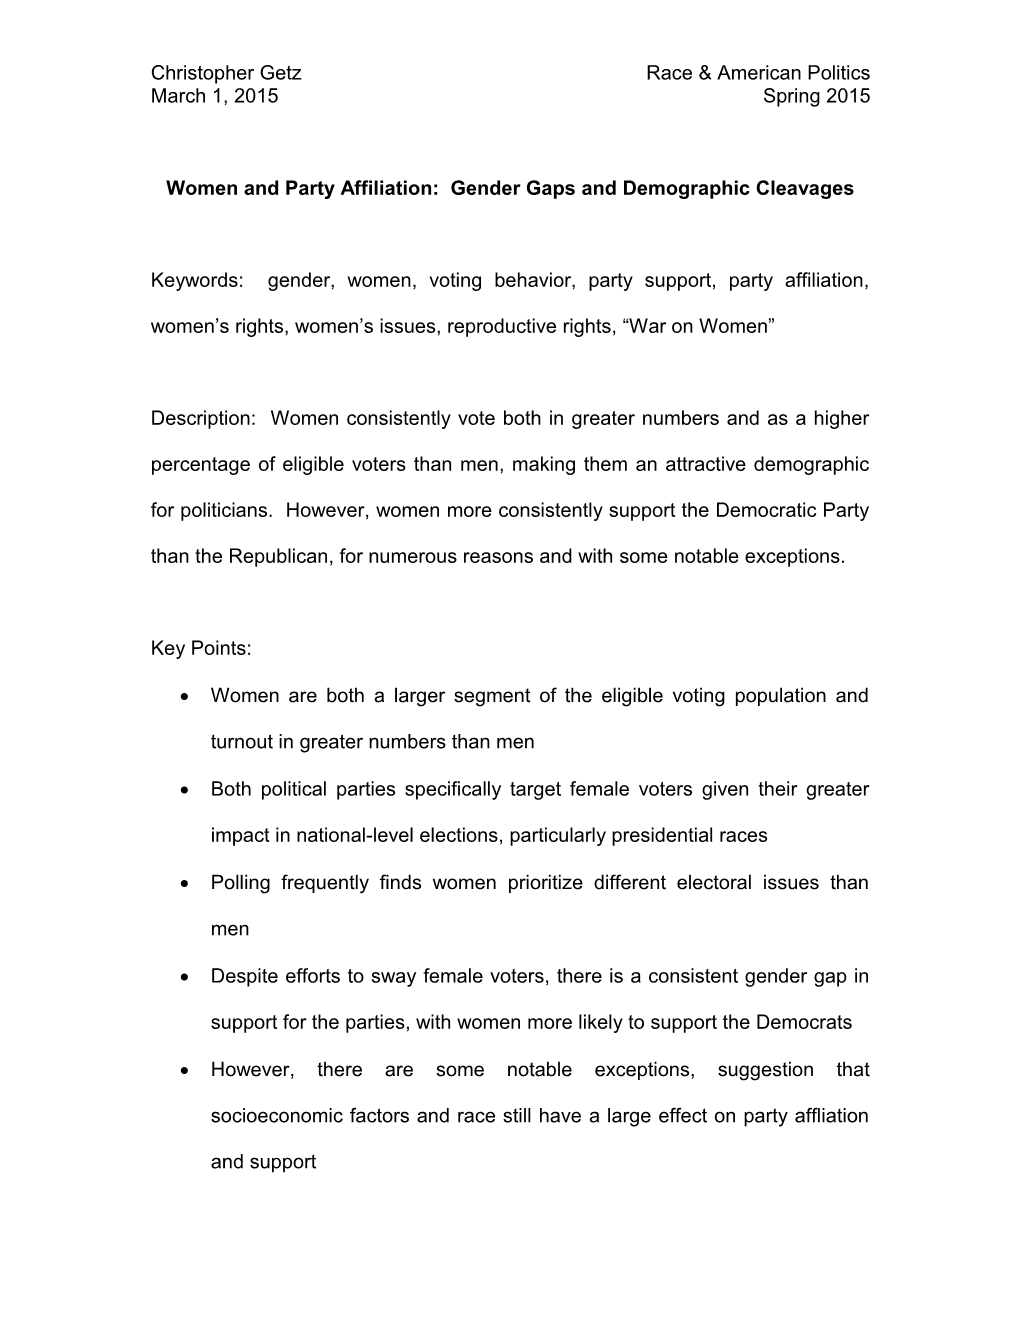 Women and Party Affiliation: Gender Gaps and Demographic Cleavages